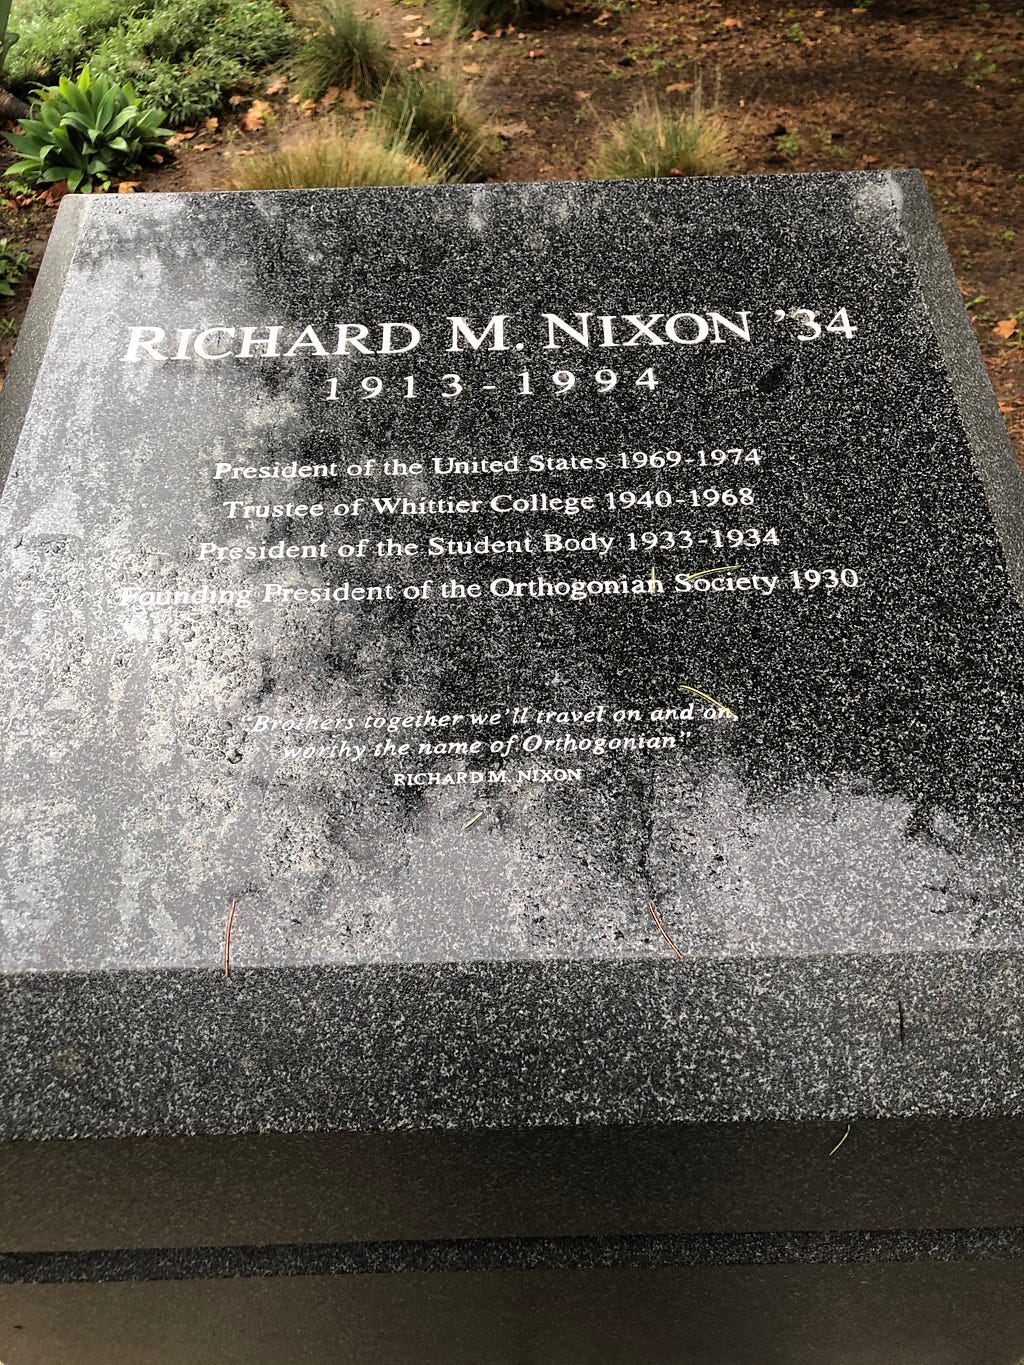 Memorial by the Orthogonian Pond, dedicated to Richard Nixon.